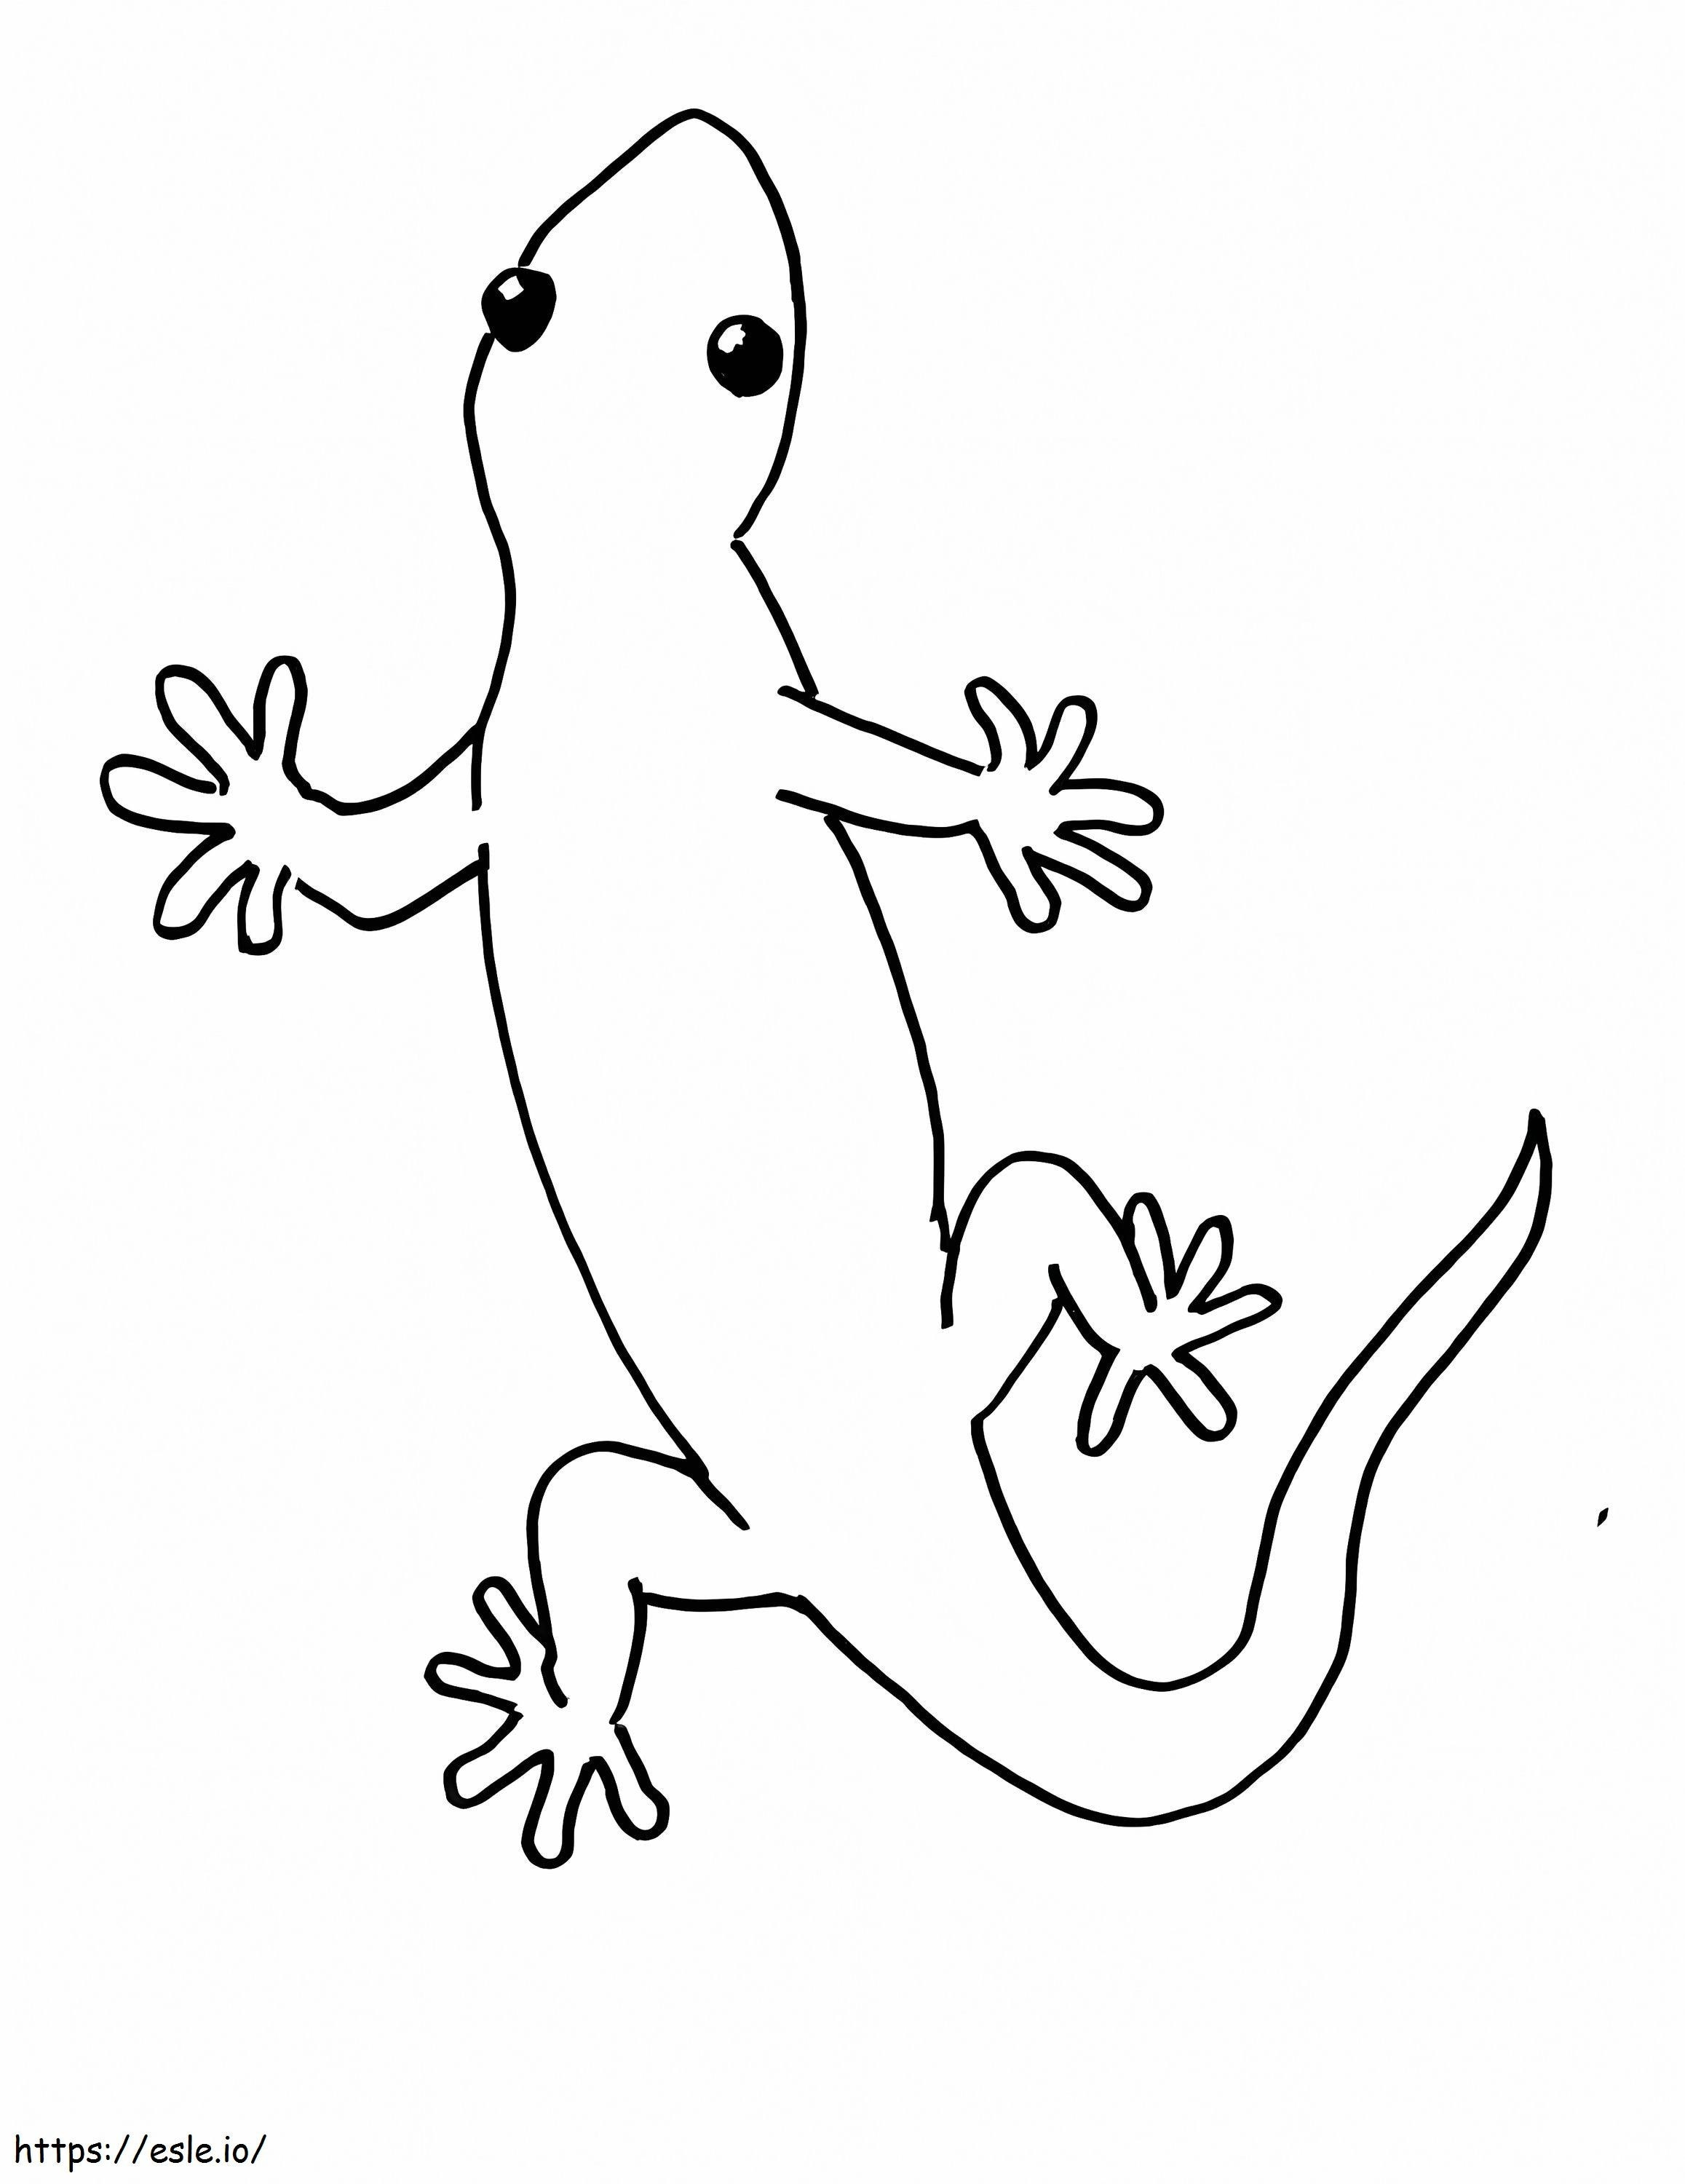 Easy Gecko coloring page